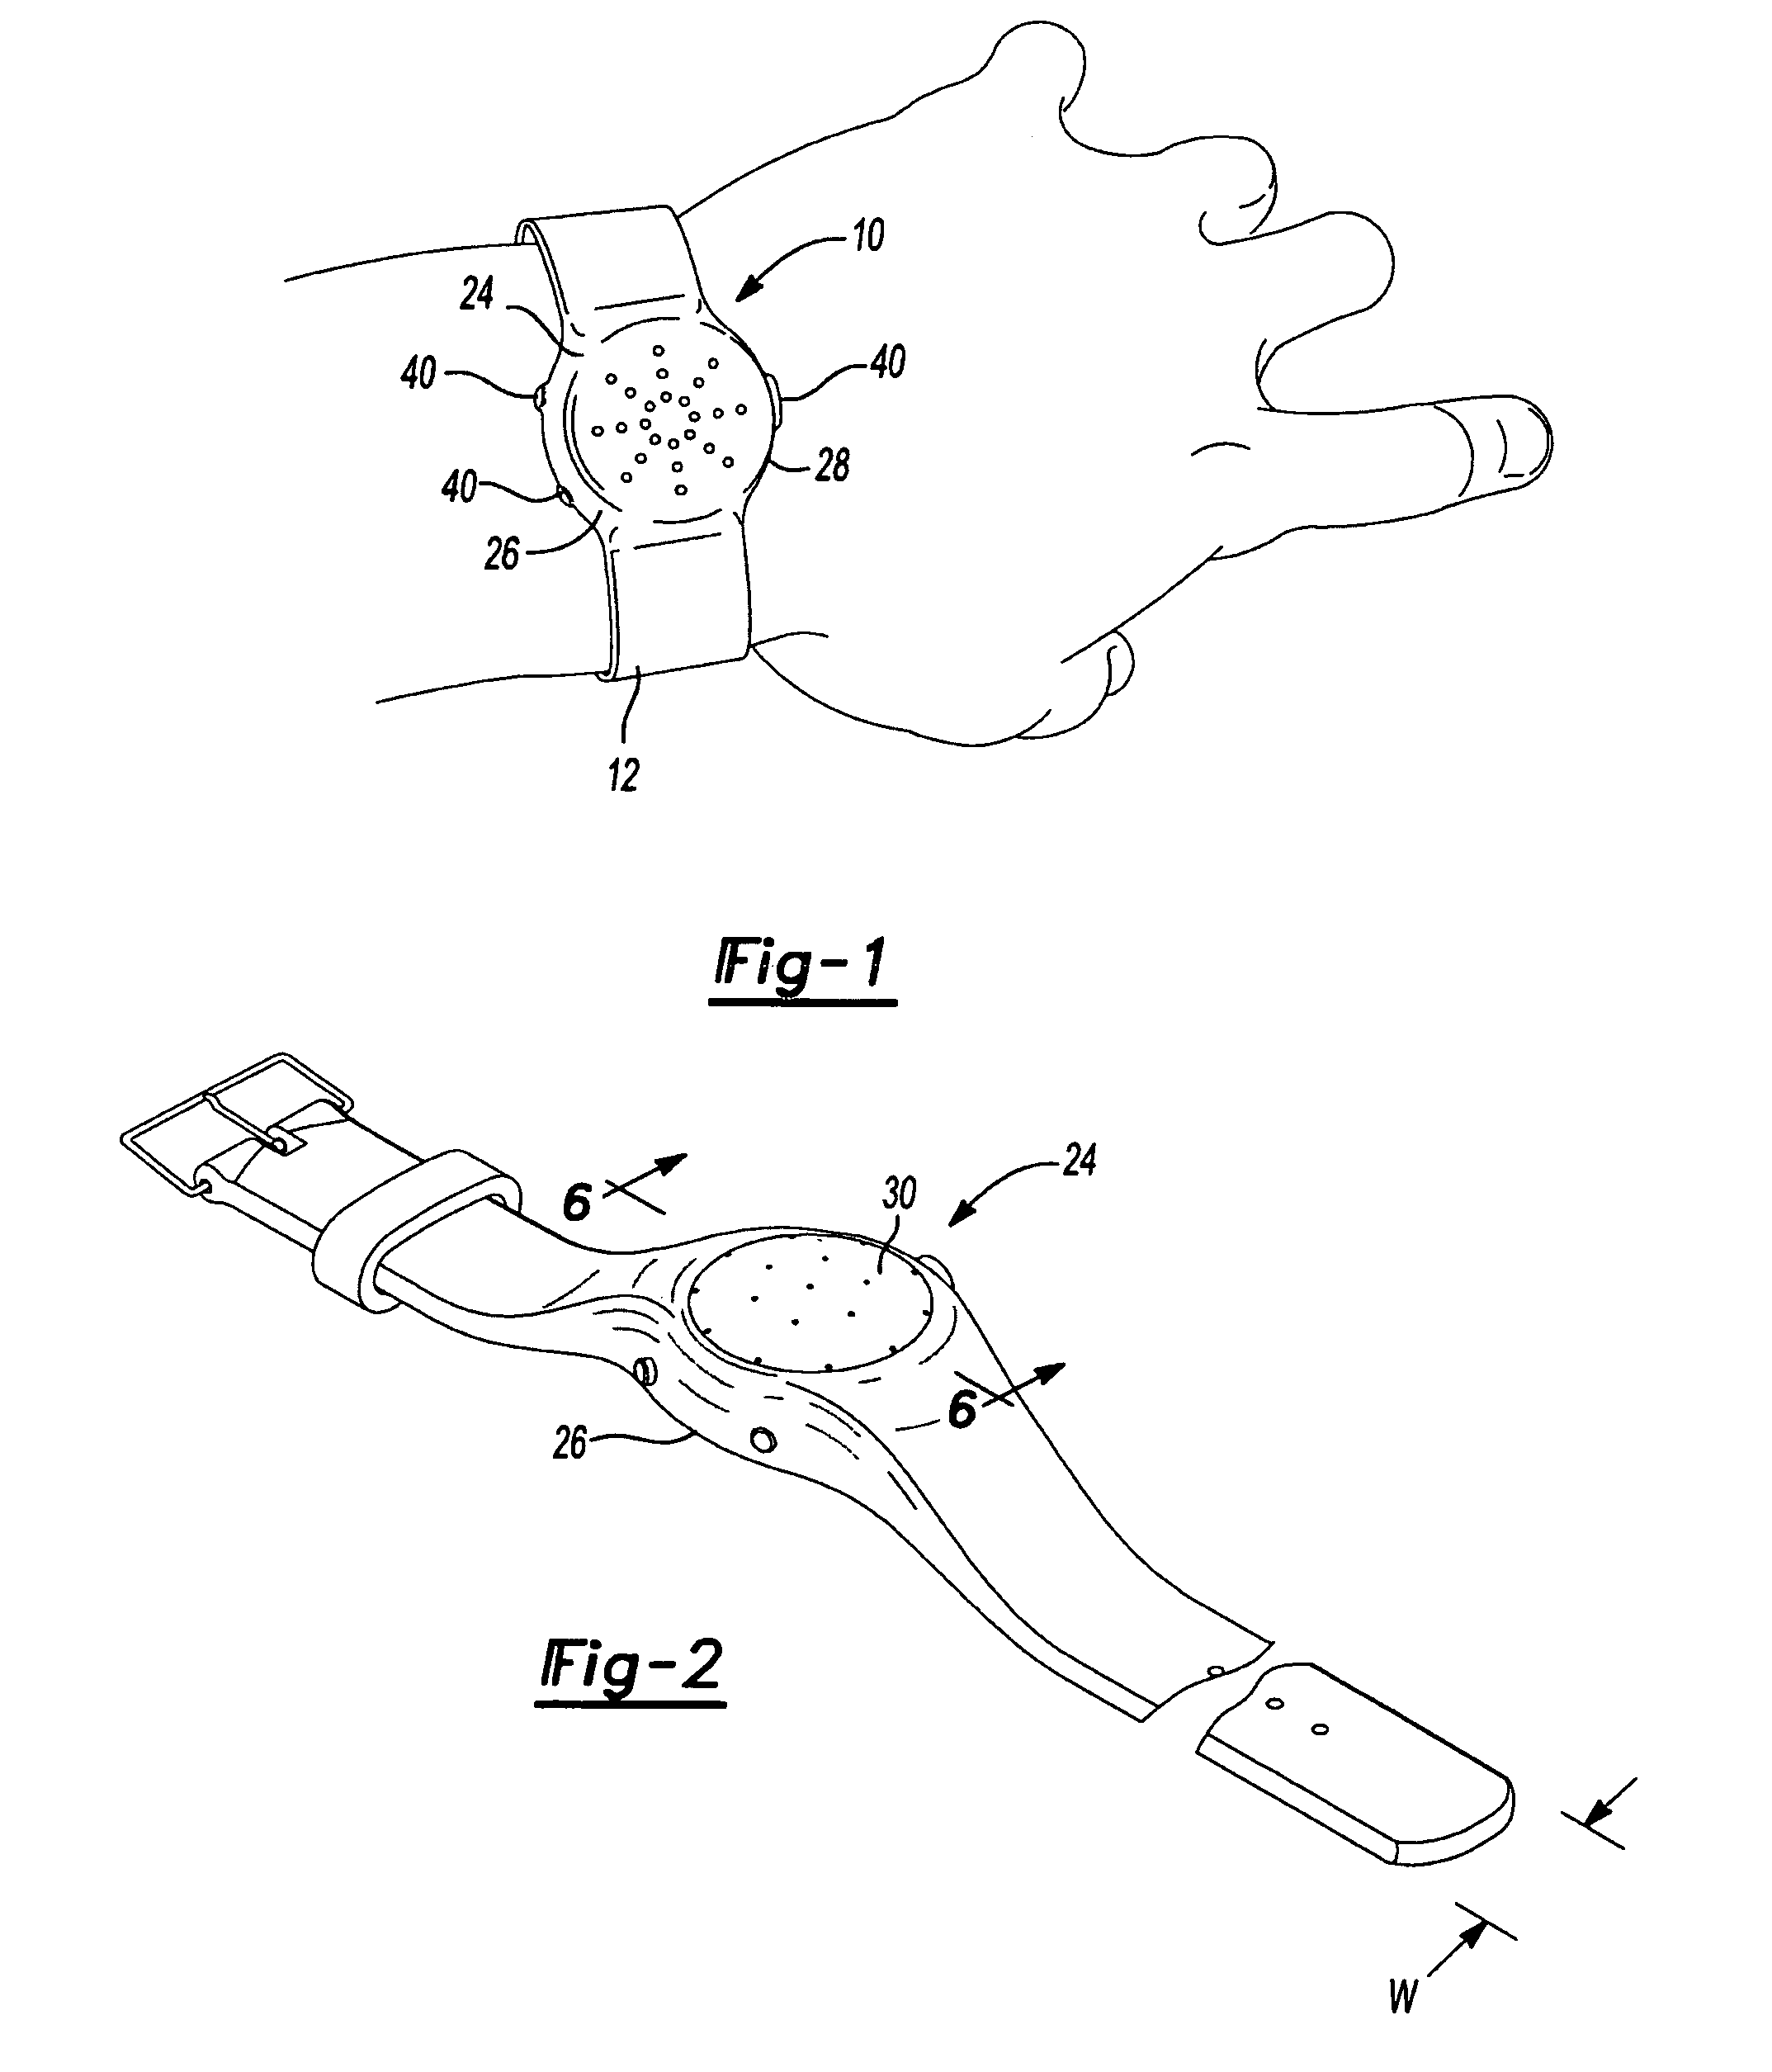 Sound recordable/playable device and method of use